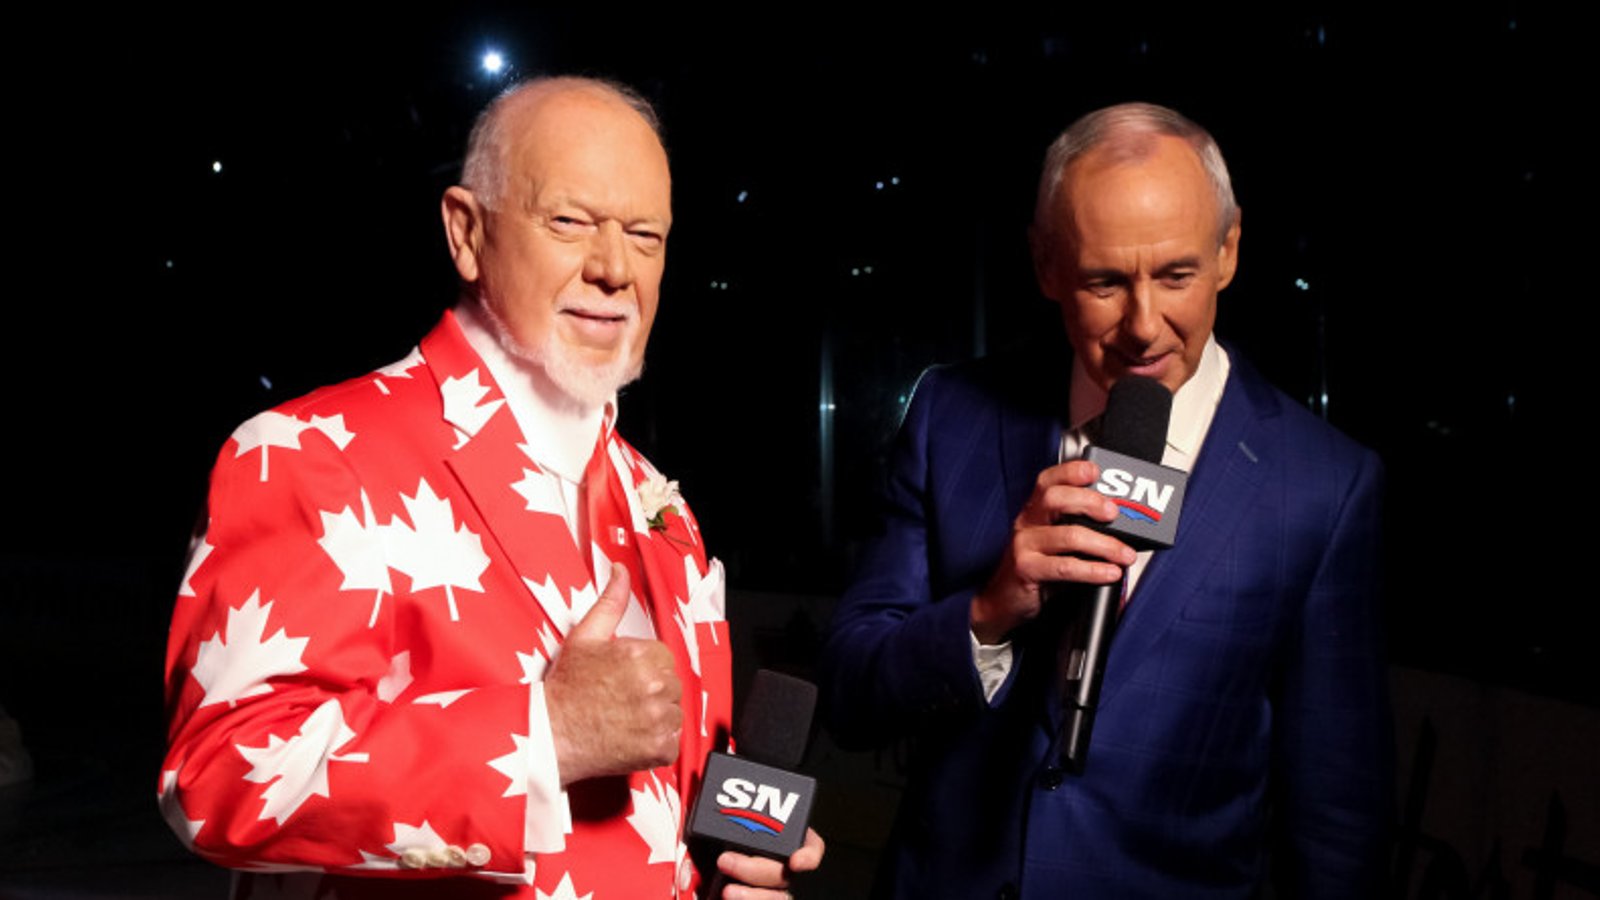 Hockey Night in Canada ratings take major hit since Don Cherry’s firing